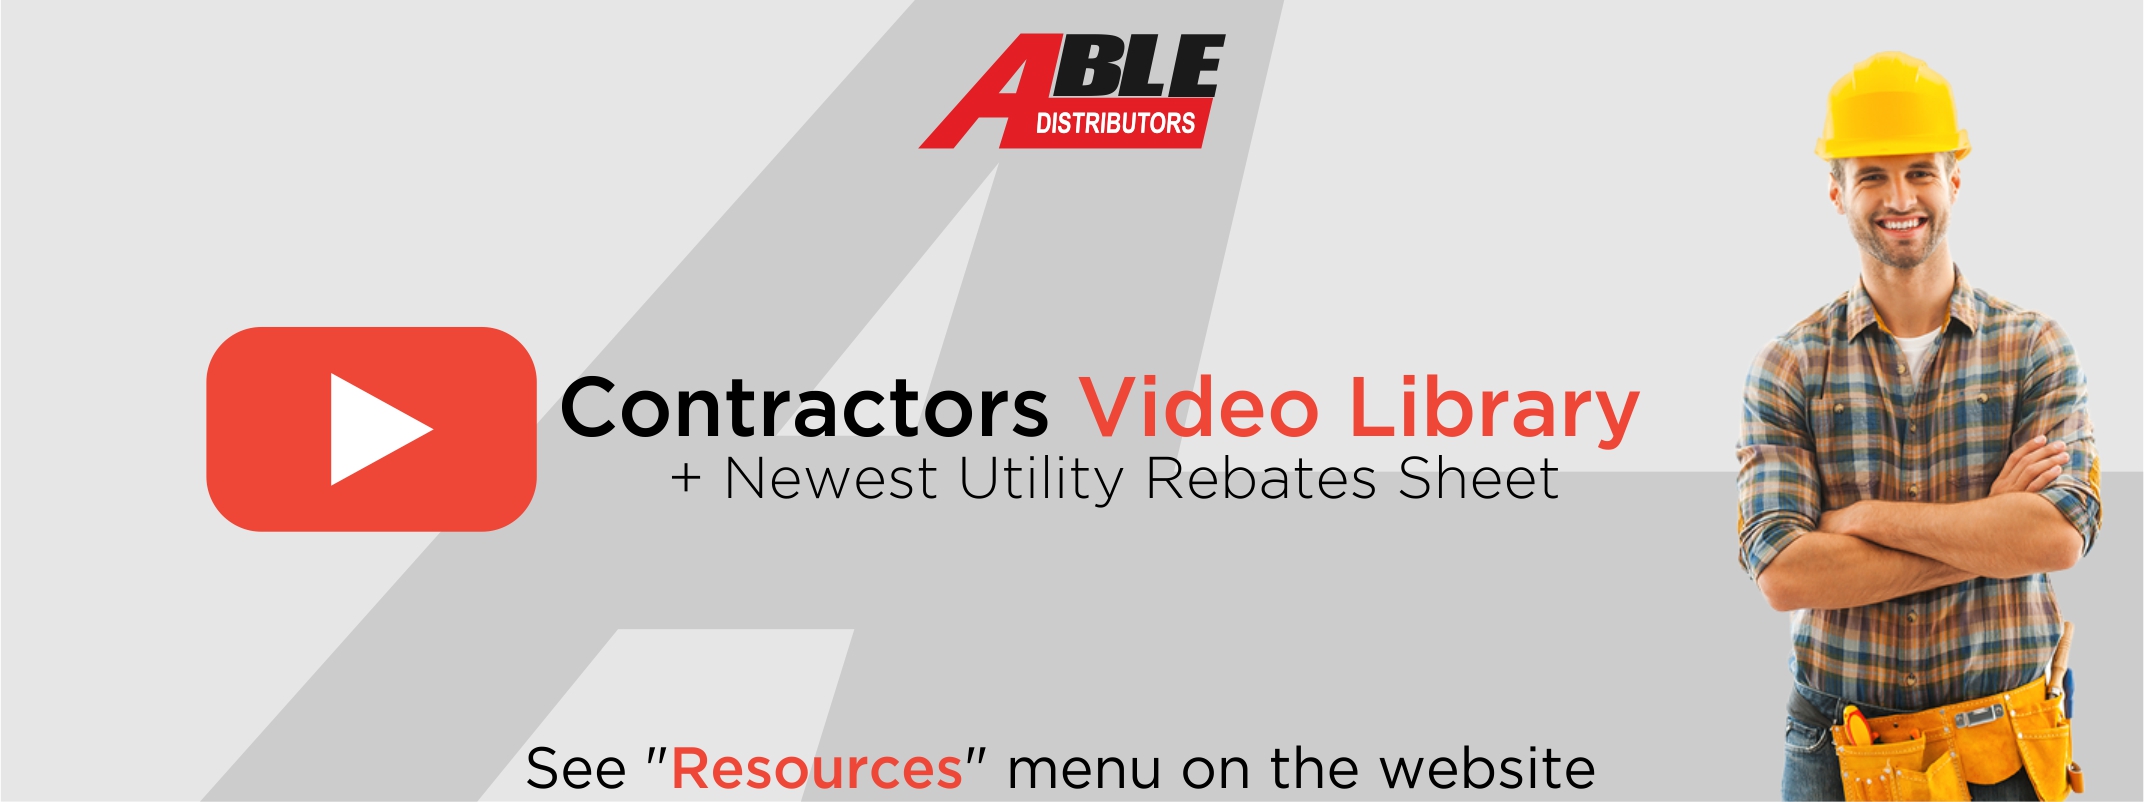 new-resources-from-able-rebate-sheet-video-library-able-distributors